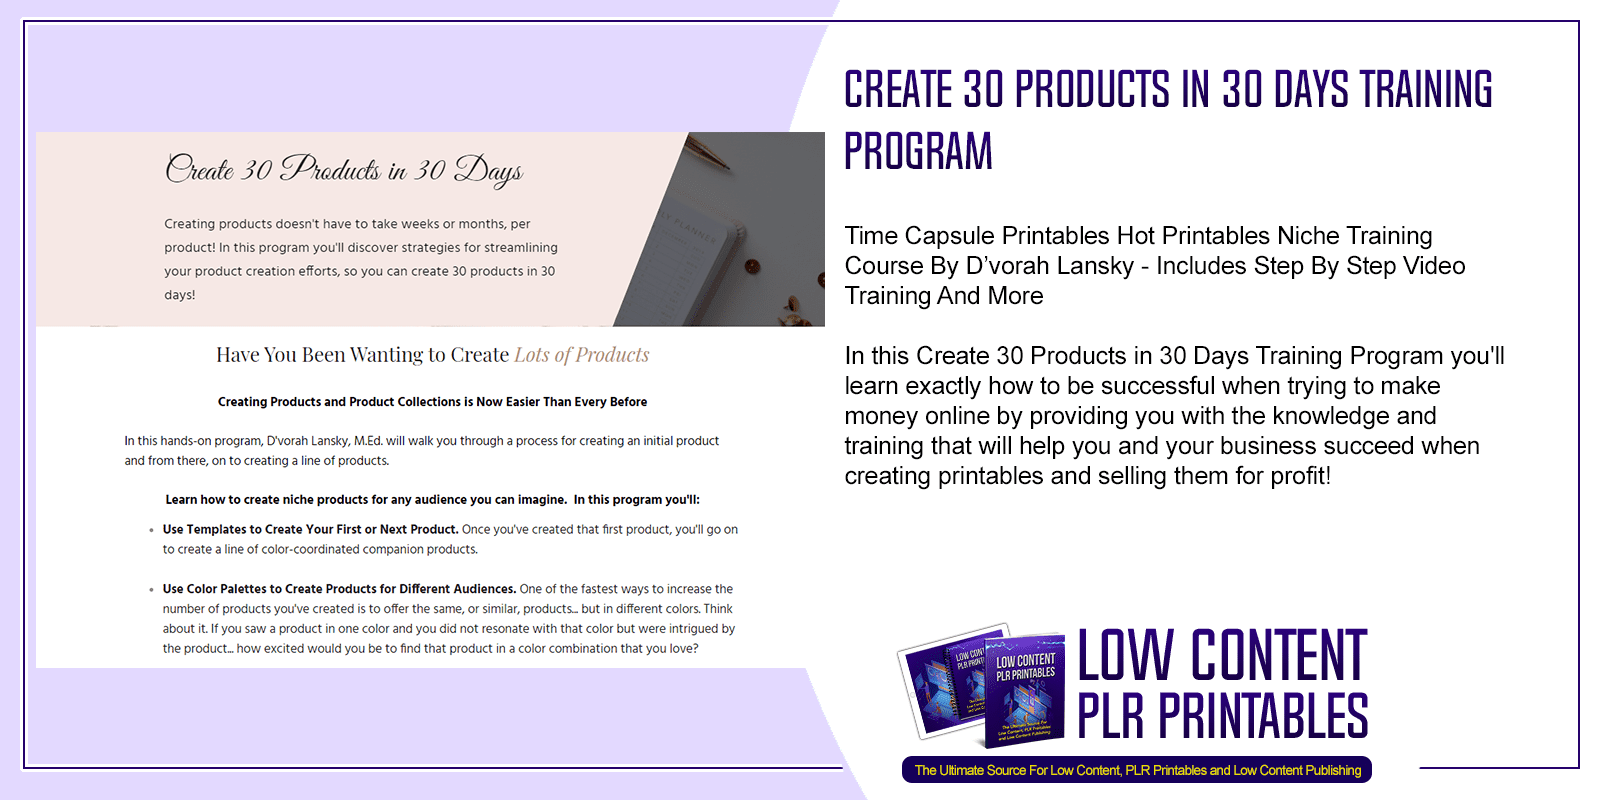 Create 30 Products in 30 Days Training Program